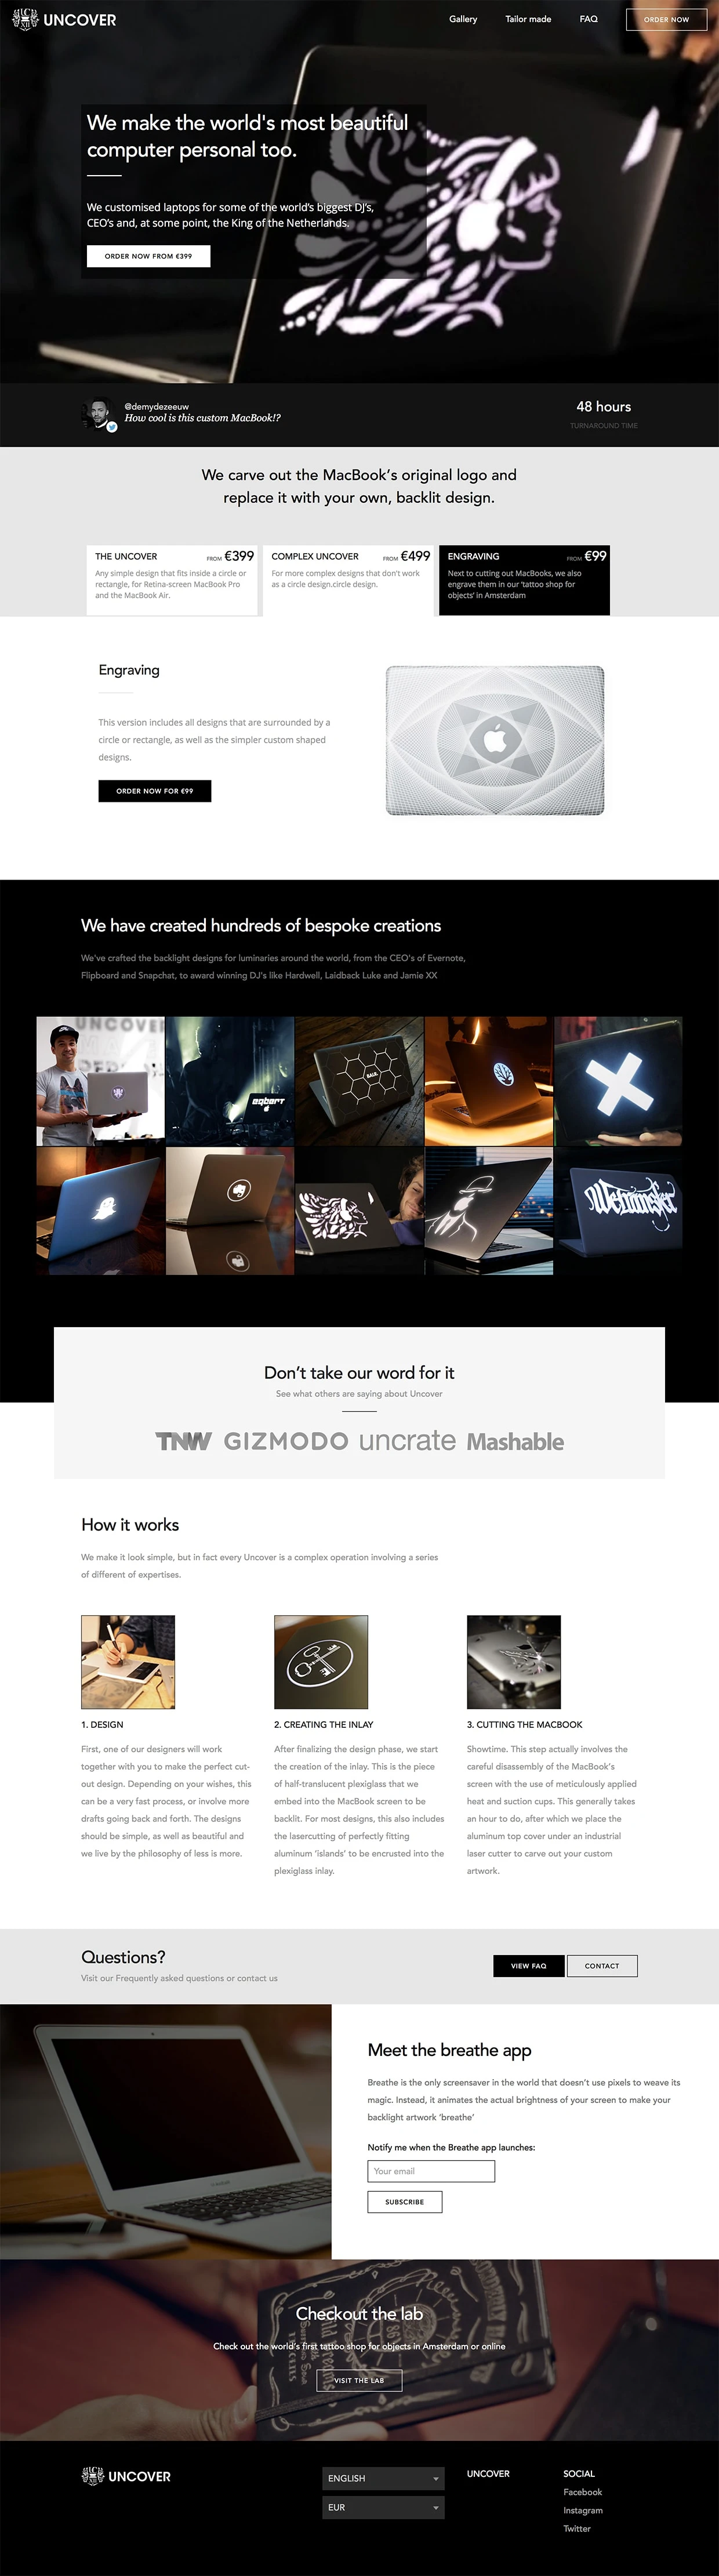 UNCOVER Landing Page Example: We lasercut MacBooks and let their innate light shine through.